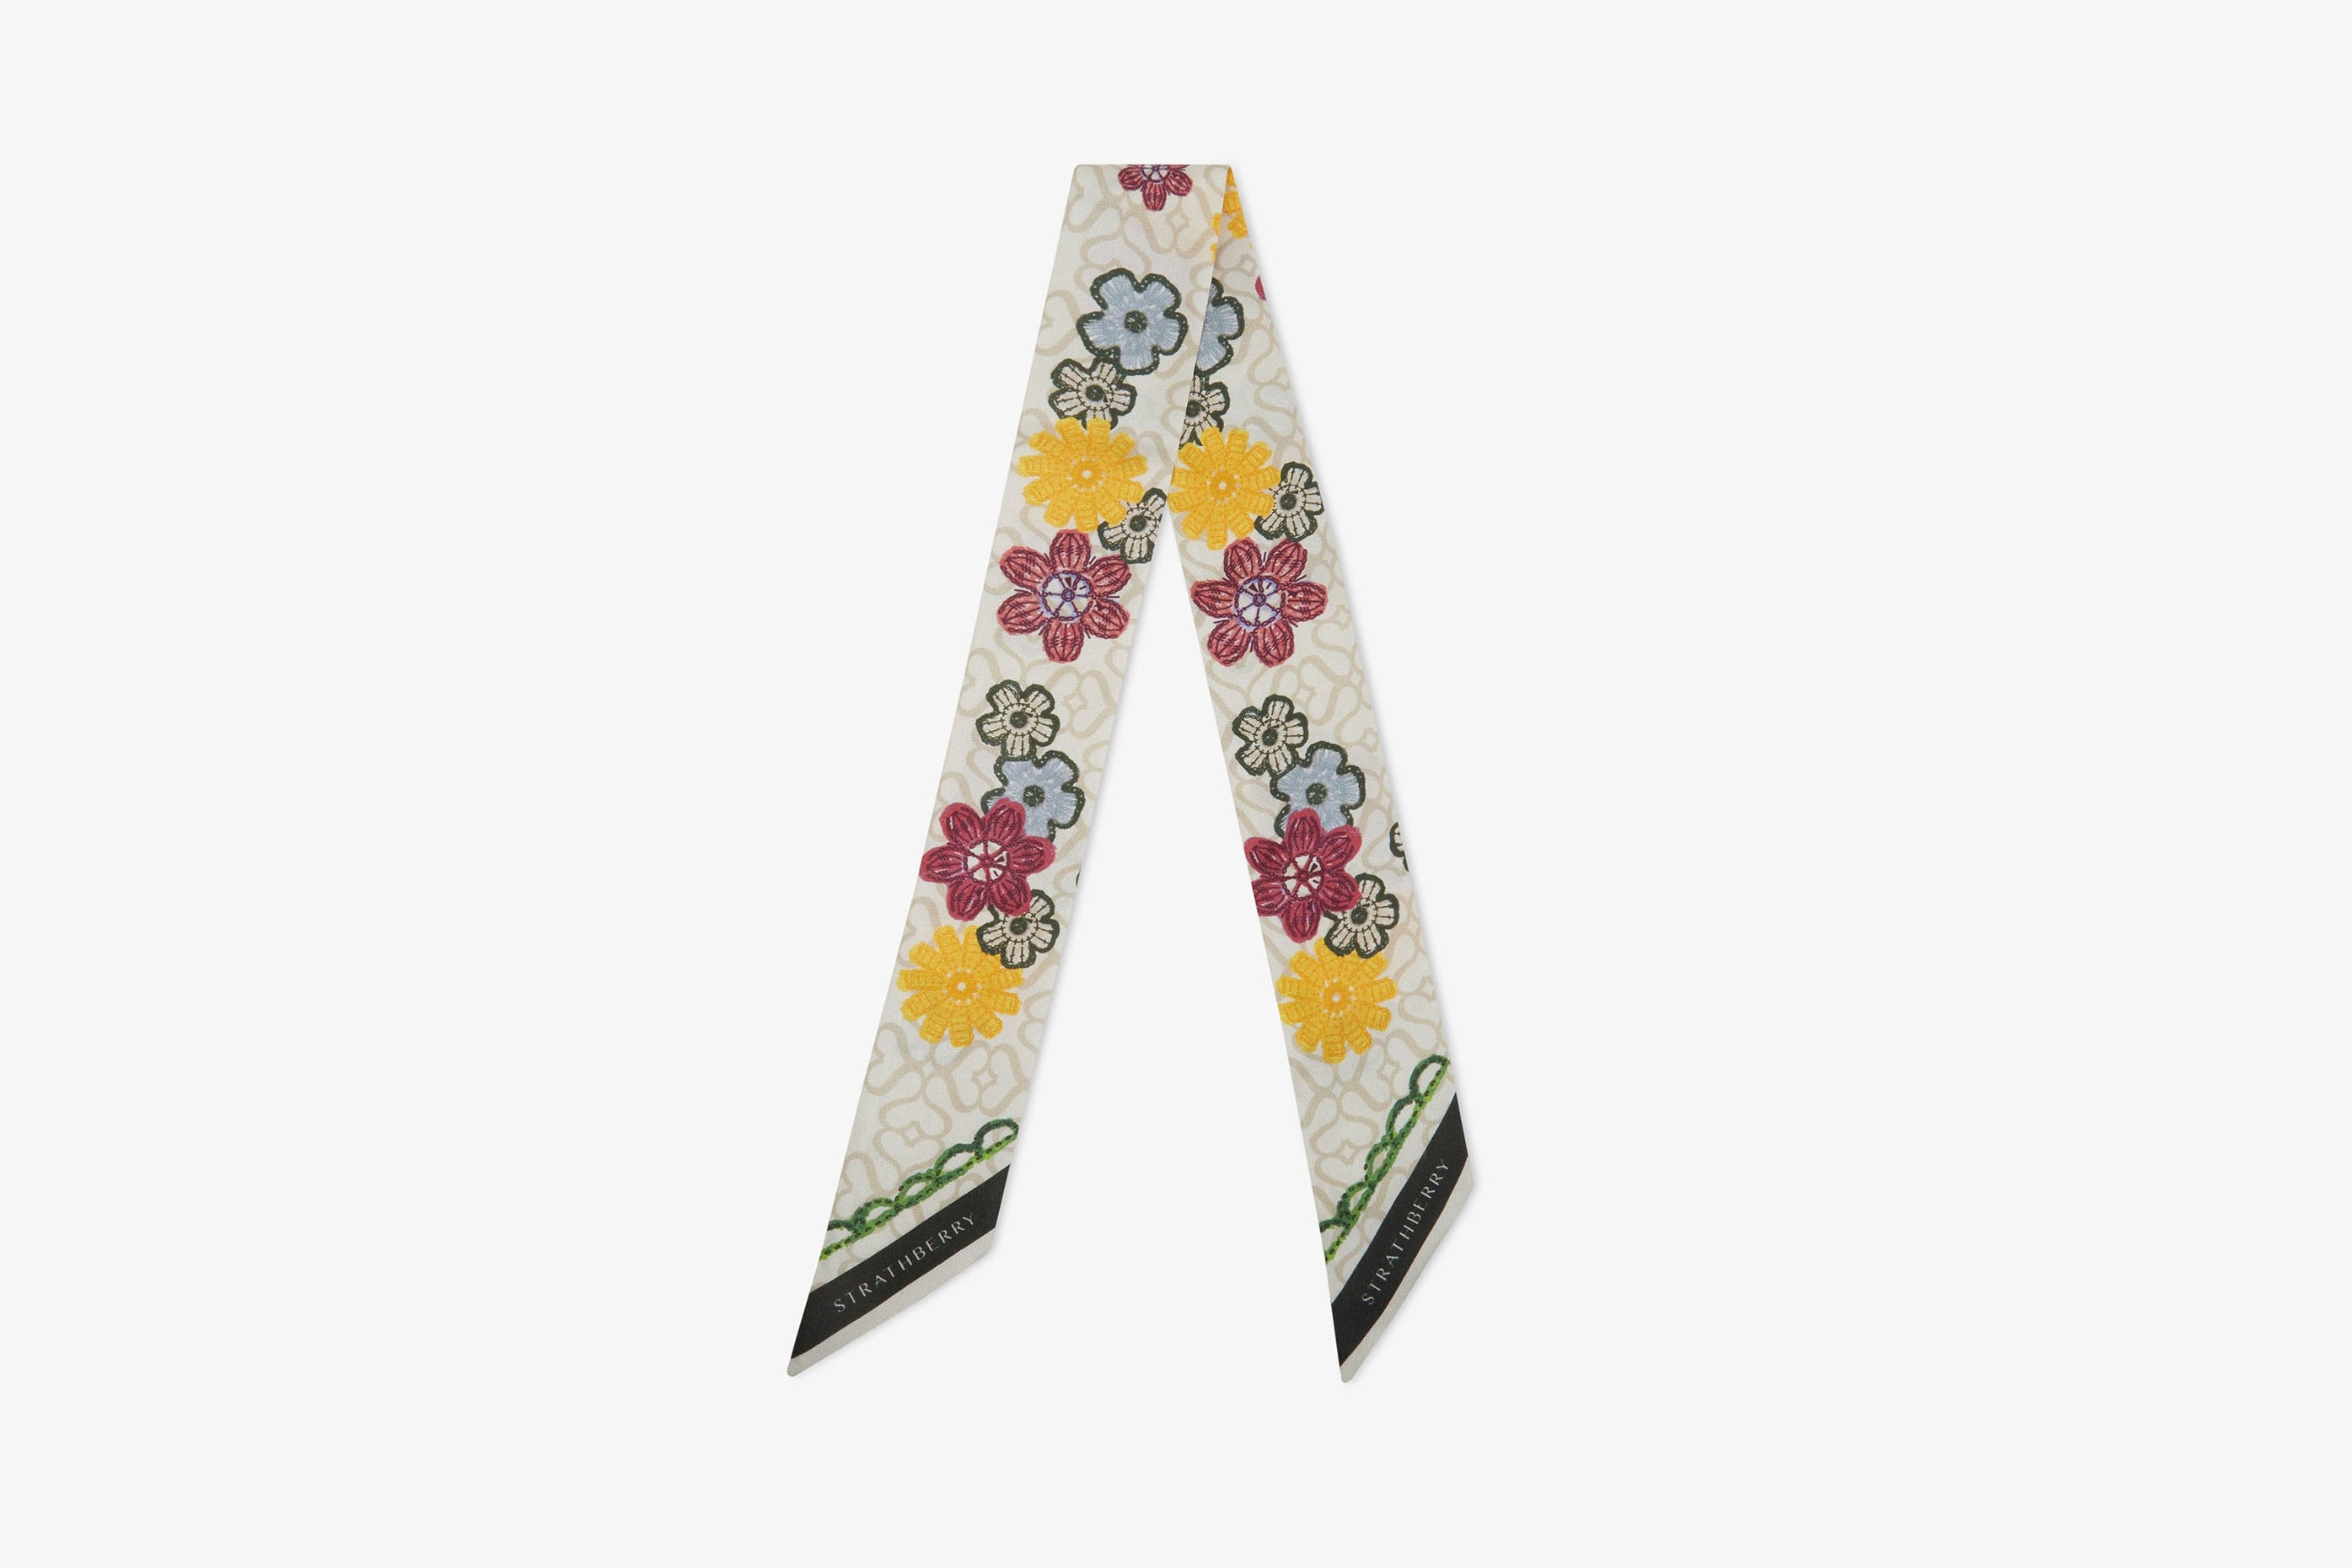 A view showcasing our Silk Skinny Scarf - Monogram Floral Print Yellow/Green